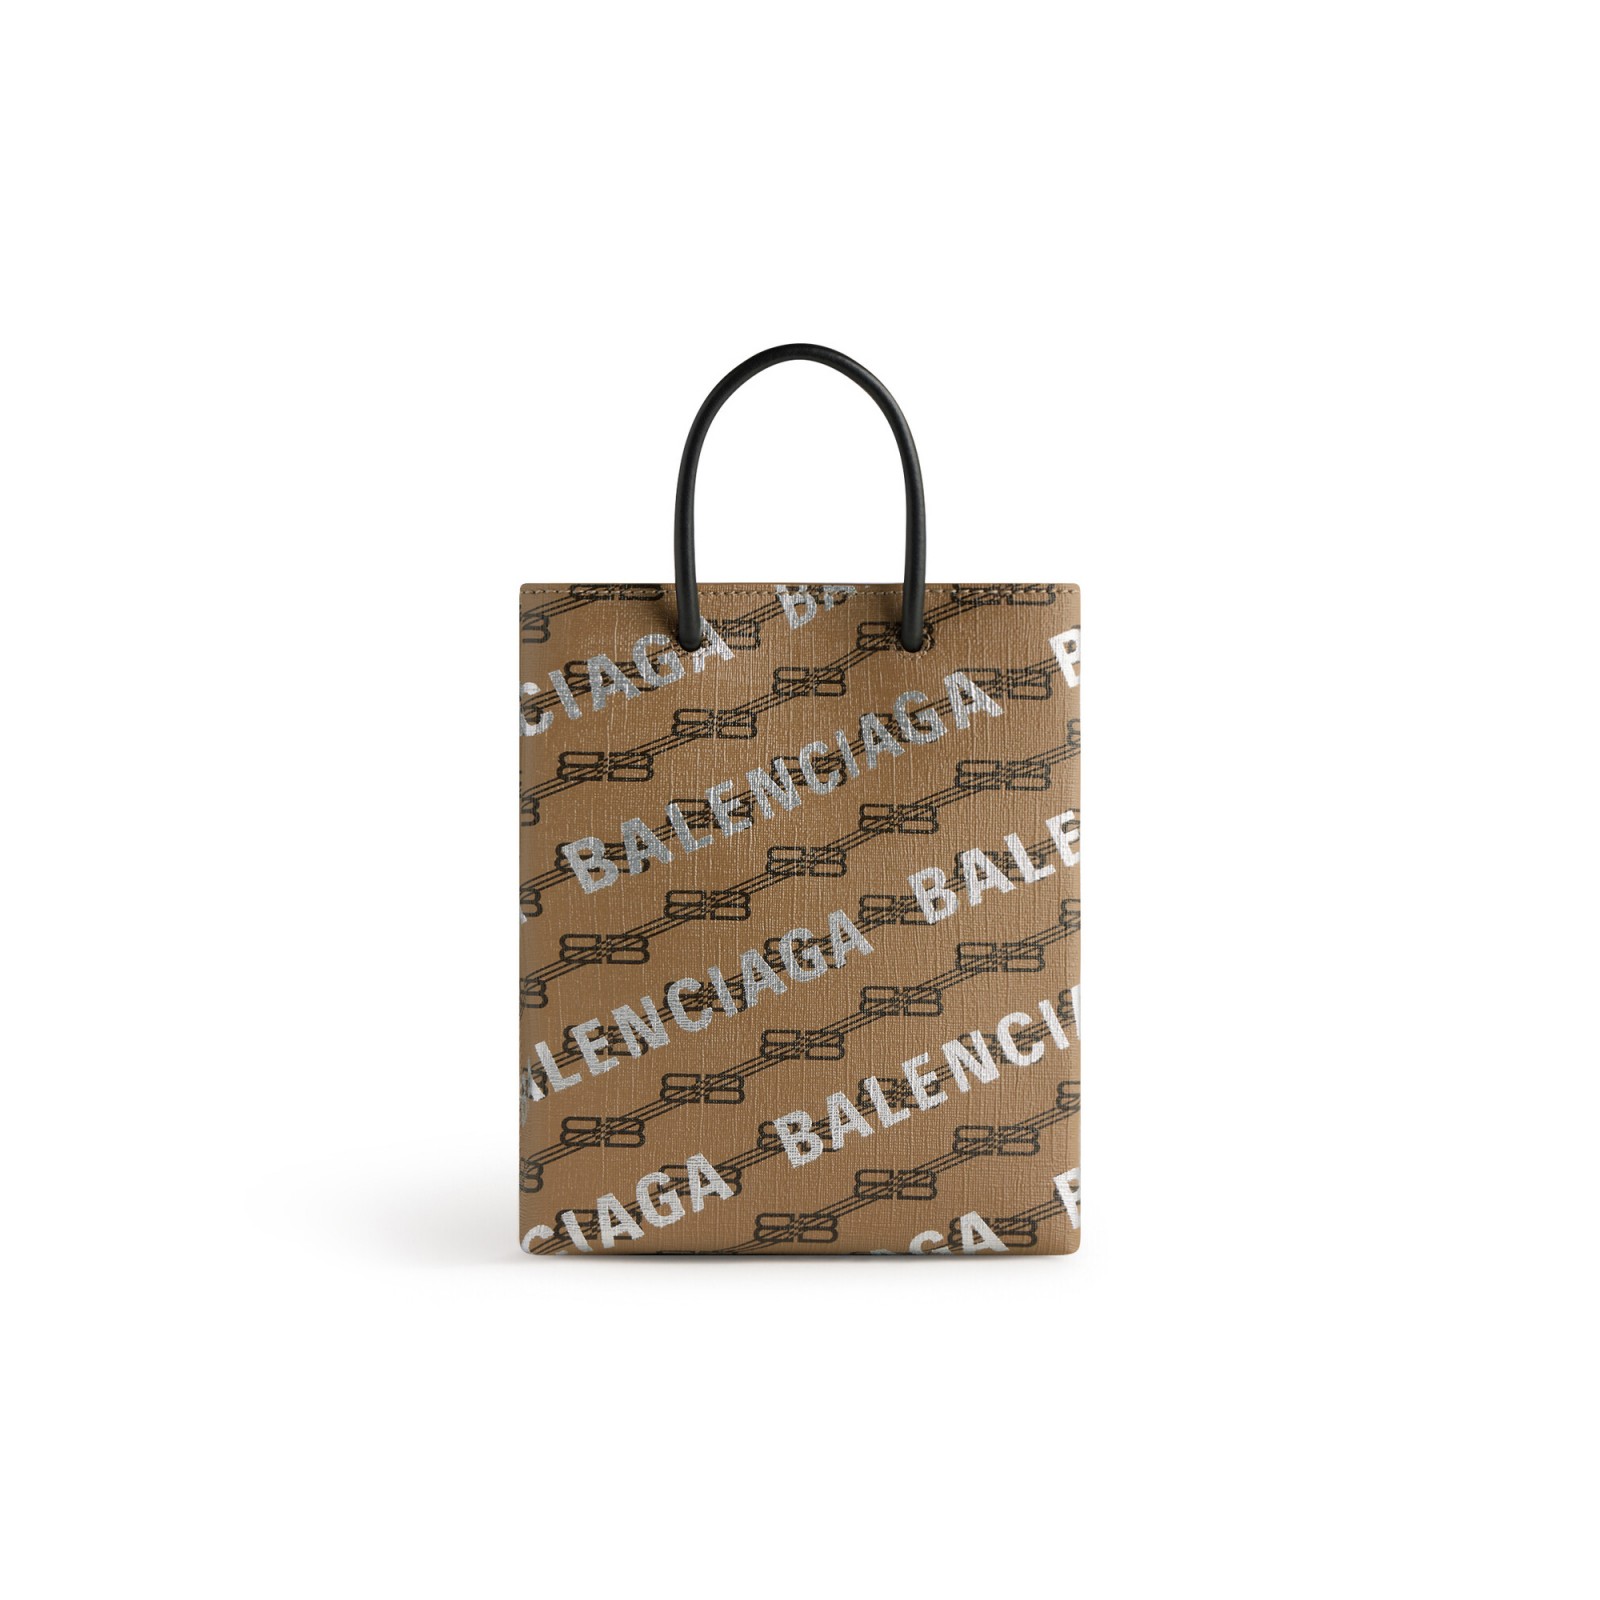 LARGE SHOPPING BAG BB MONOGRAM COATED CANVAS AND ALLOVER LOGO